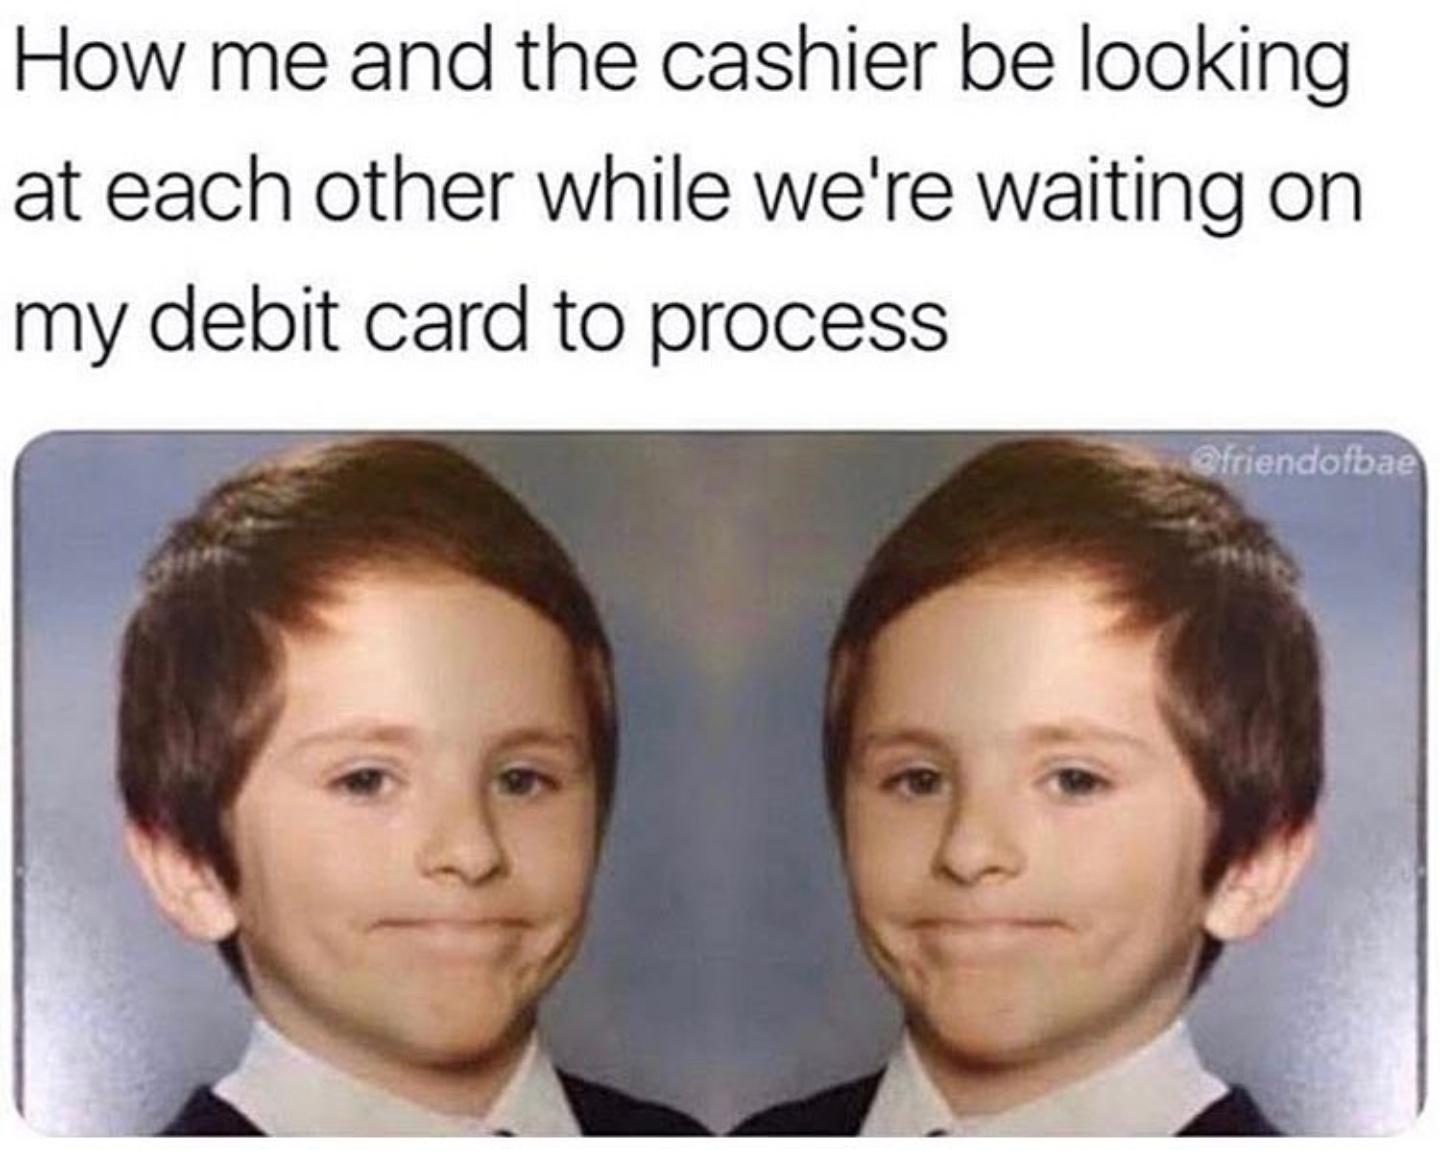 memes - me and the cashier be looking - How me and the cashier be looking at each other while we're waiting on my debit card to process